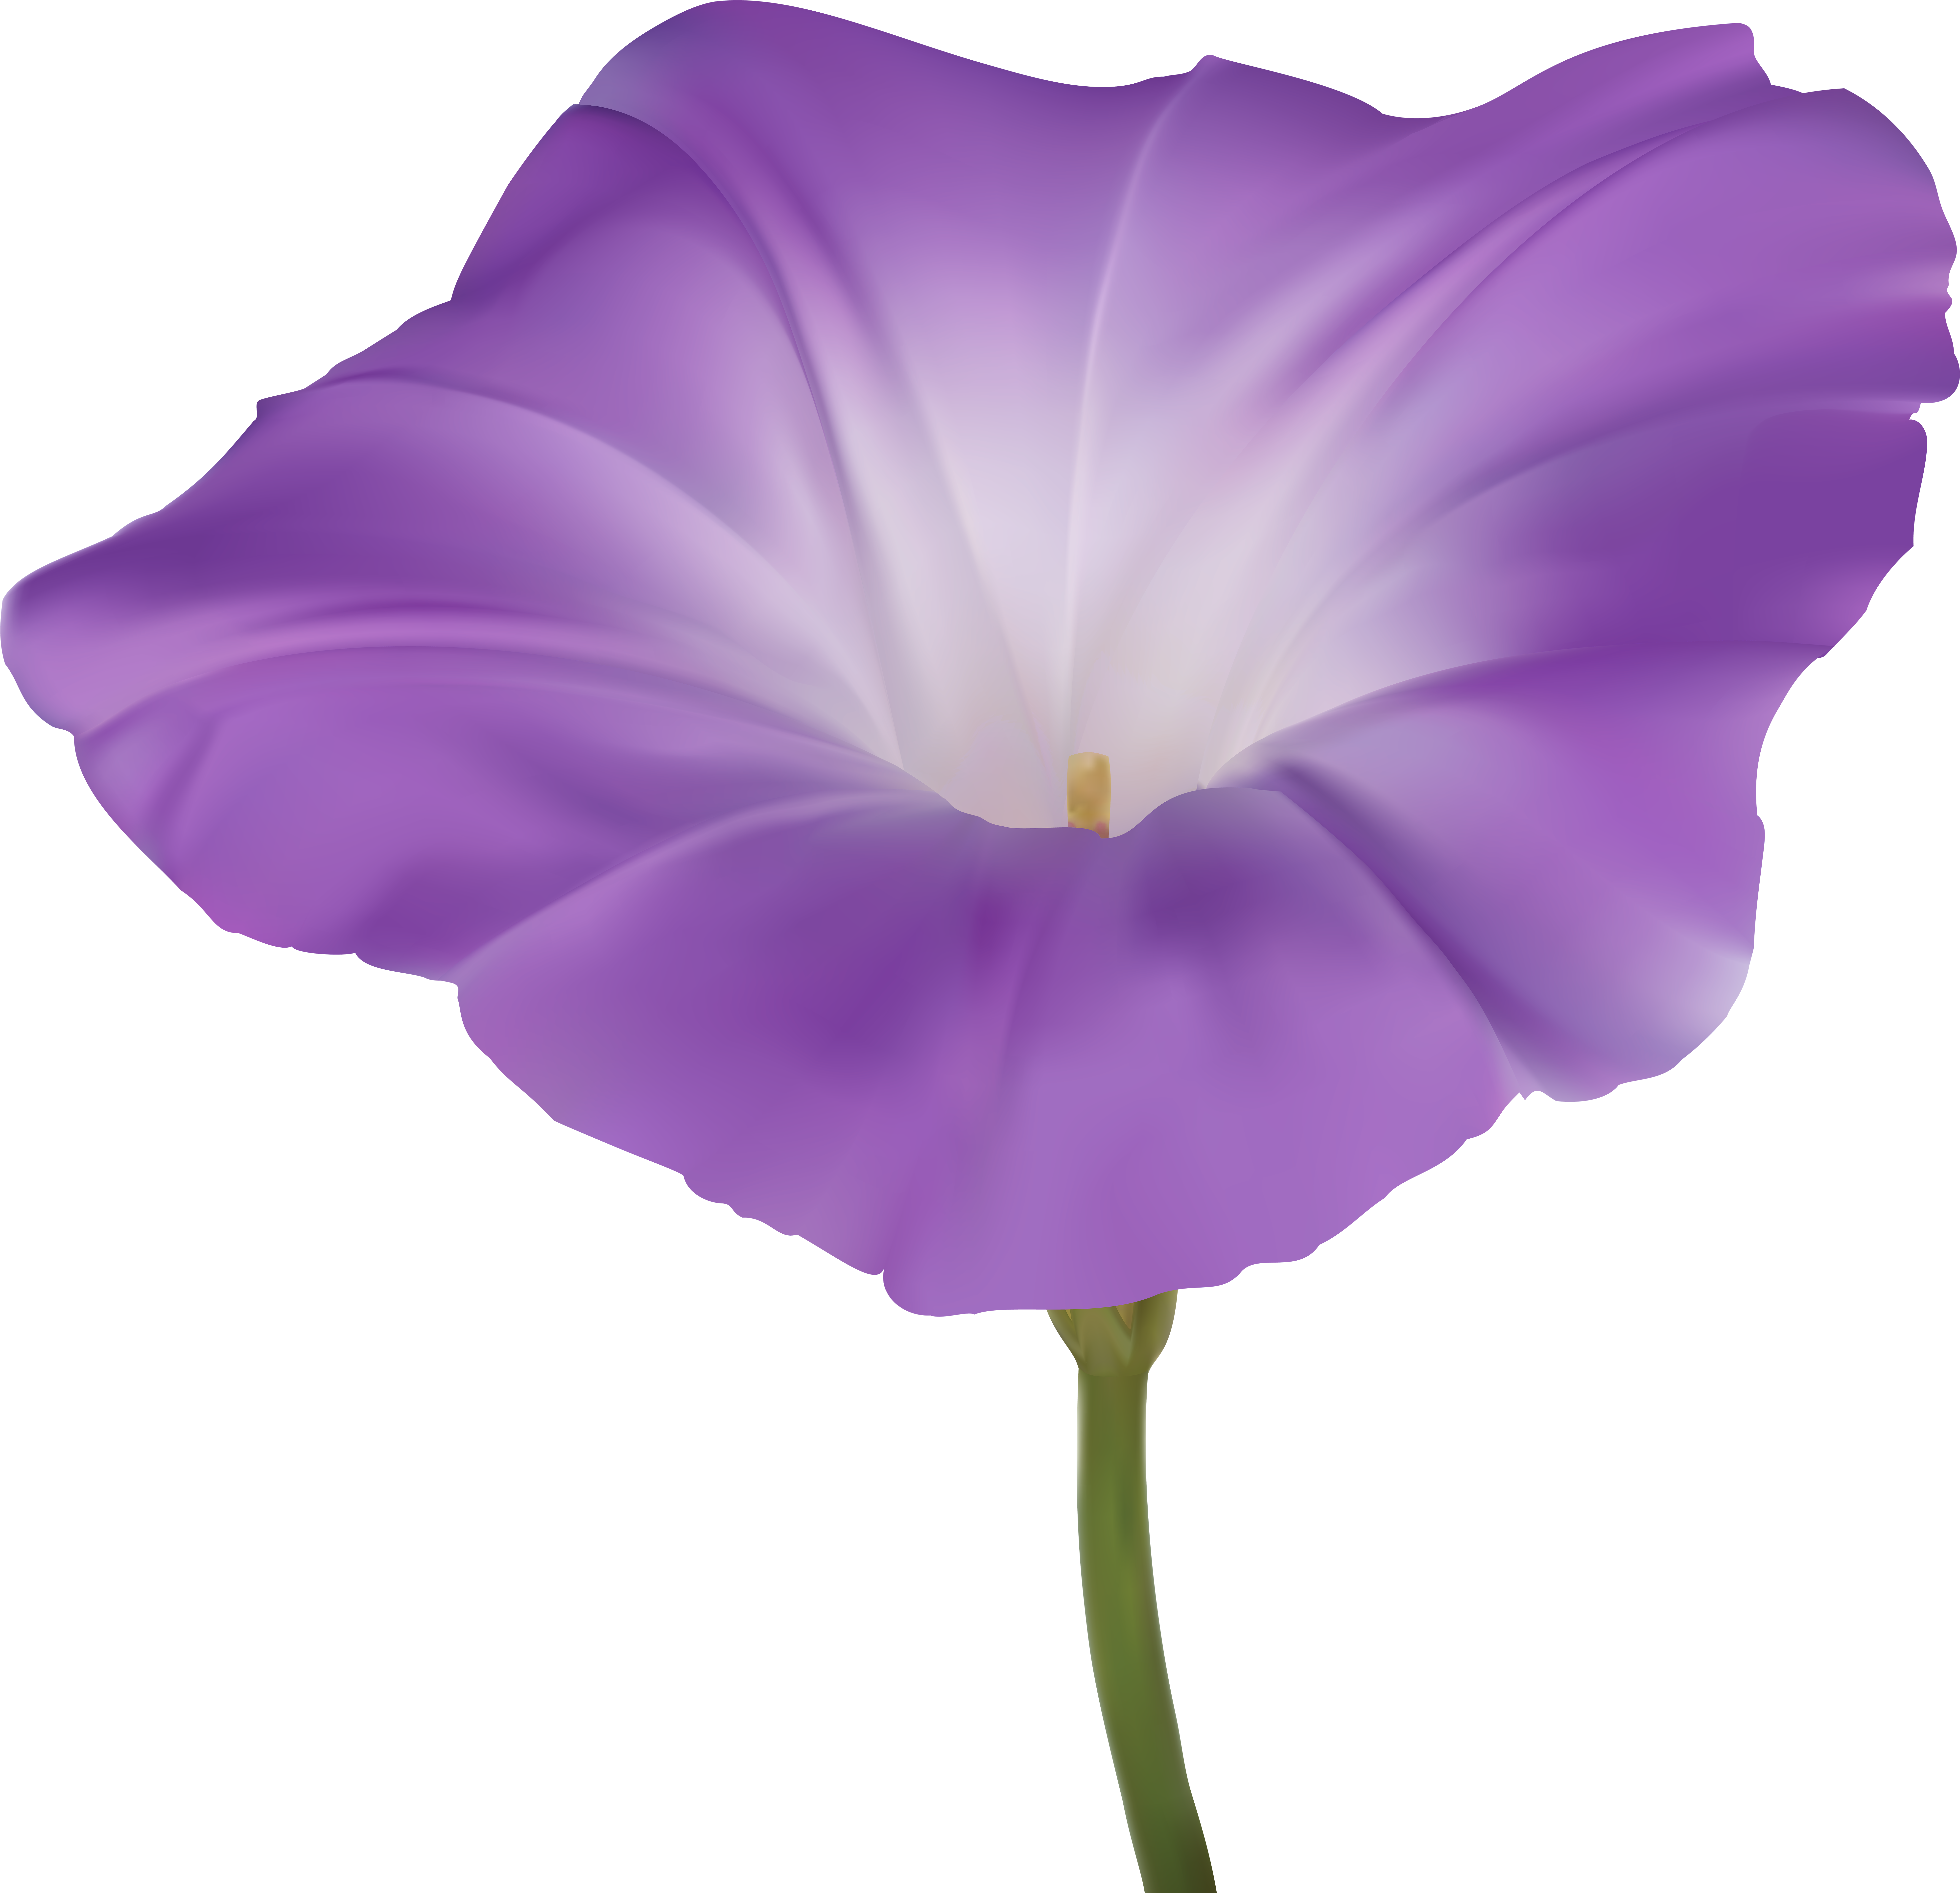 A Purple Flower With A Green Stem